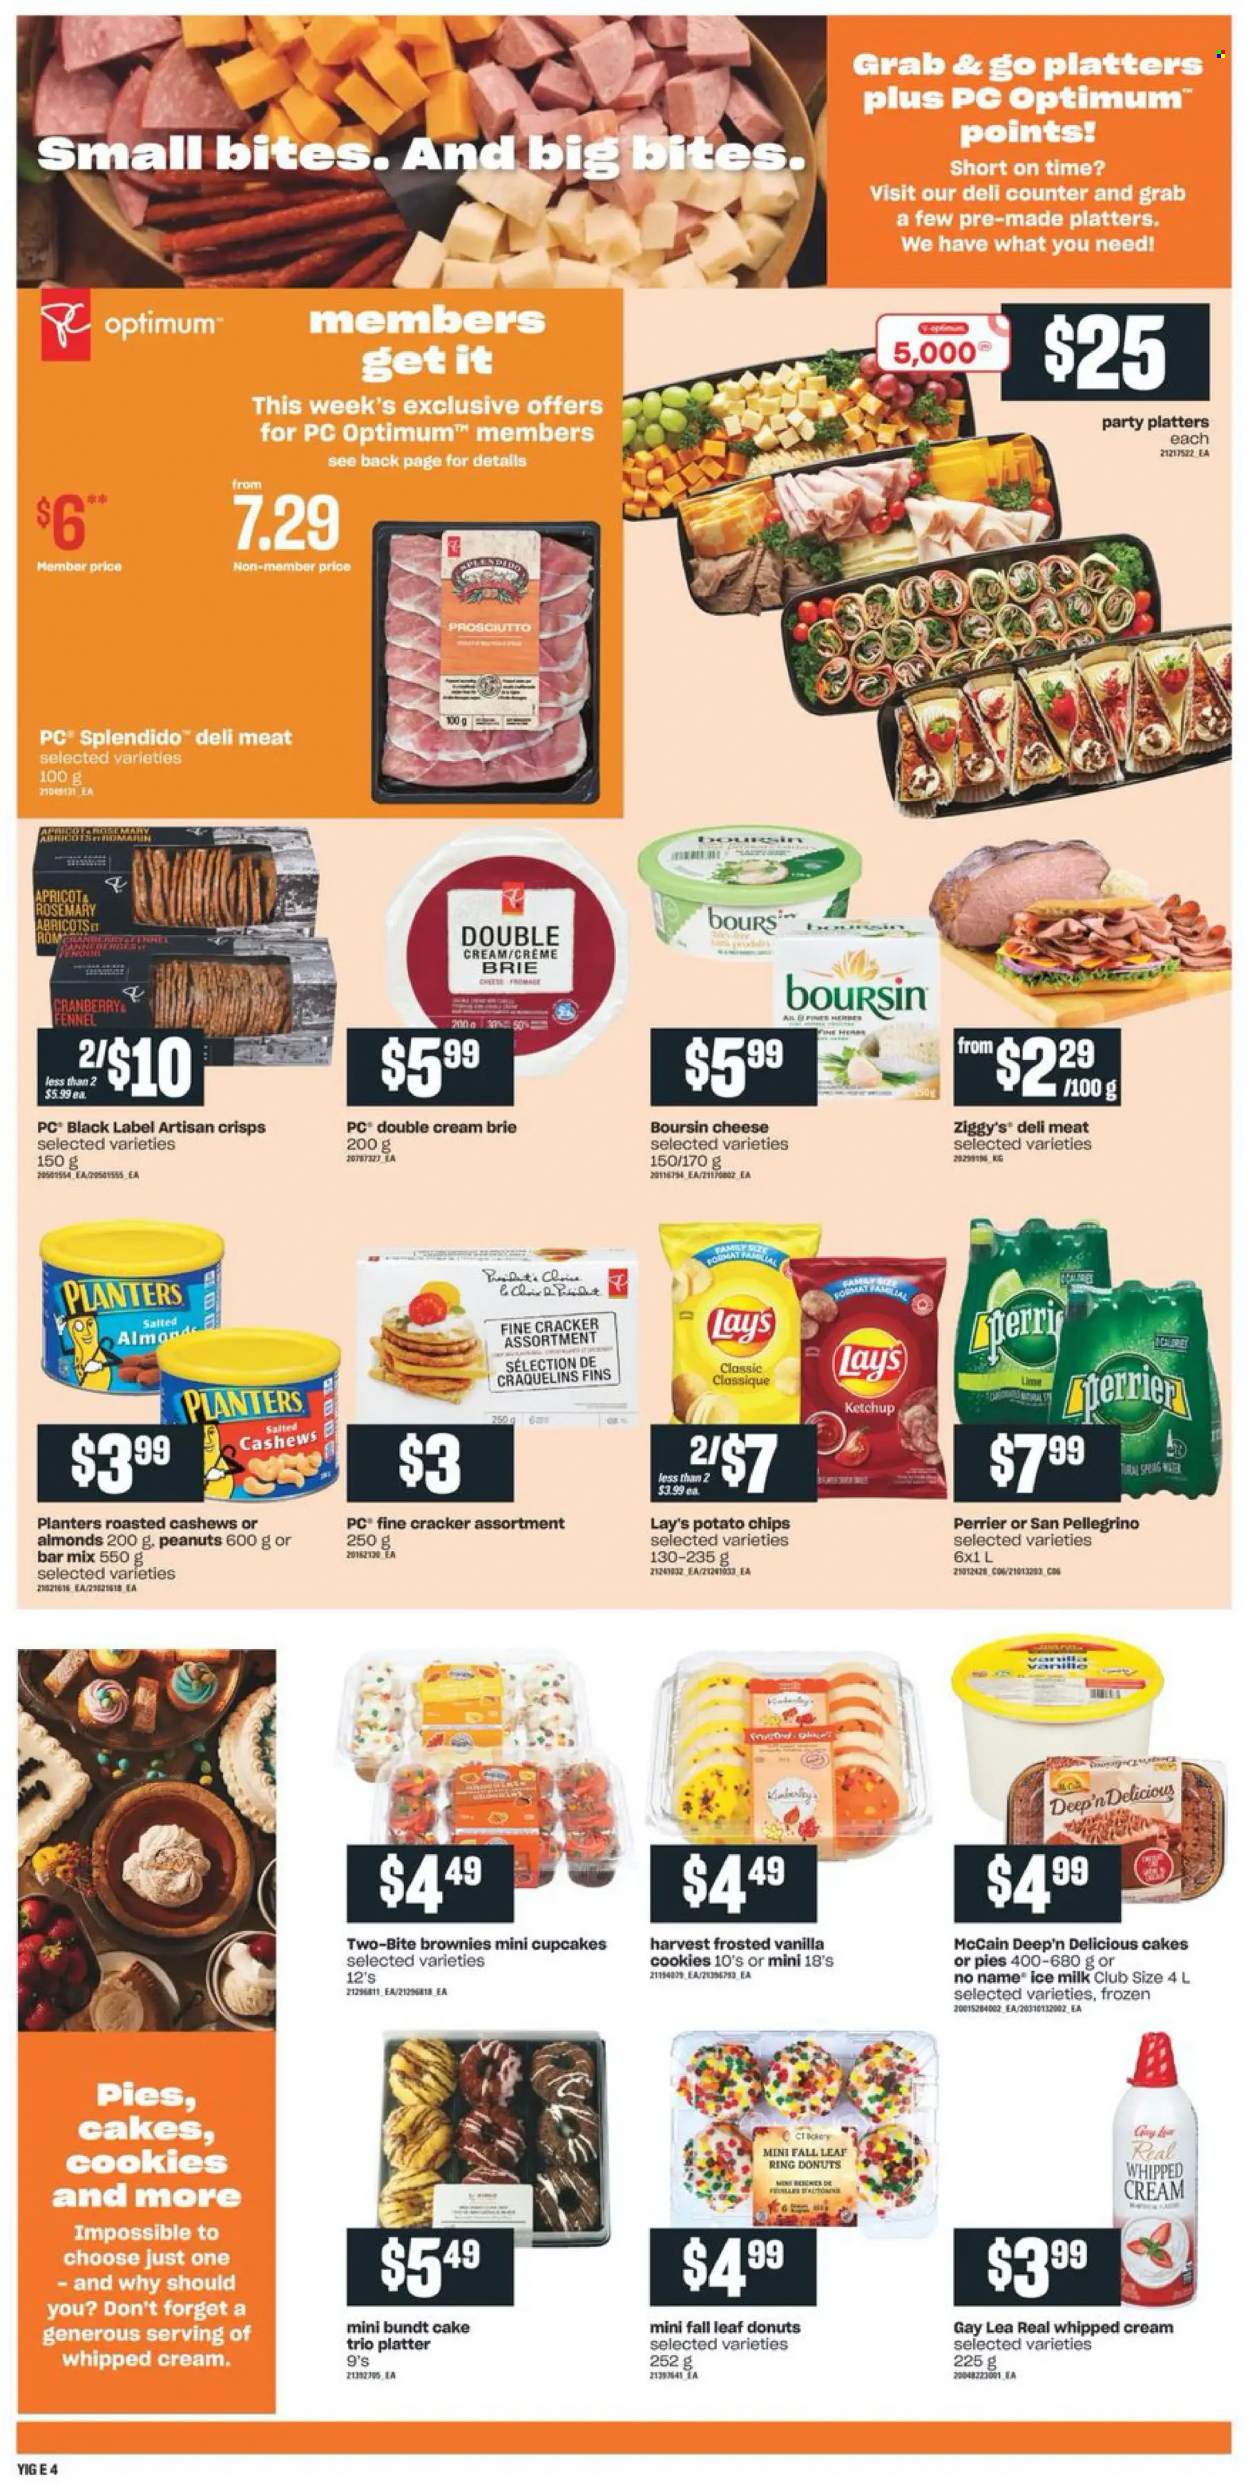 thumbnail - Independent Flyer - September 30, 2021 - October 06, 2021 - Sales products - cake, bundt, cupcake, brownies, donut, No Name, prosciutto, cheese, brie, milk, whipped cream, McCain, cookies, crackers, potato chips, Lay’s, fennel, rosemary, almonds, cashews, peanuts, Planters, Perrier, San Pellegrino, Optimum, ketchup. Page 6.